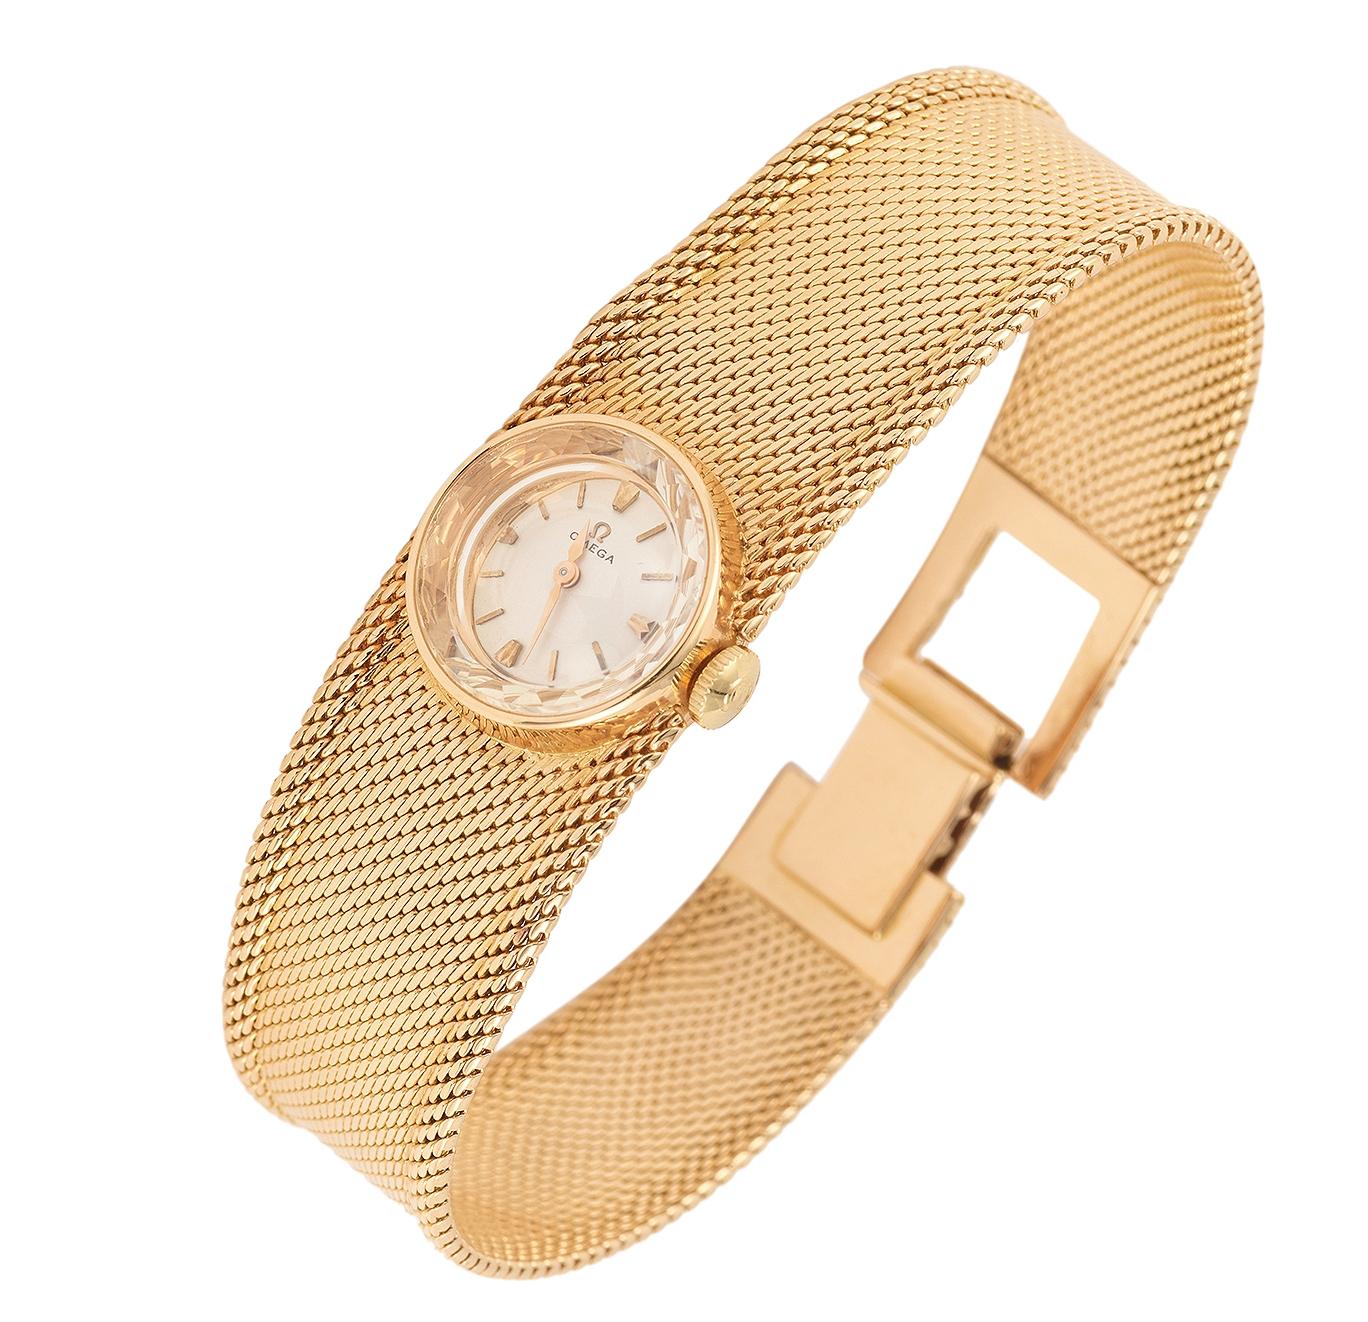 Elegant vintage Omega watch in rose gold, the strap is made in ribbon mesh.

Working manual winding movement.

Length of the bracelet: 17 cm (6.6 inches)

18K rose gold, 750/1000th

France, circa 1960/70

This watch is vintage, the bracelet is very